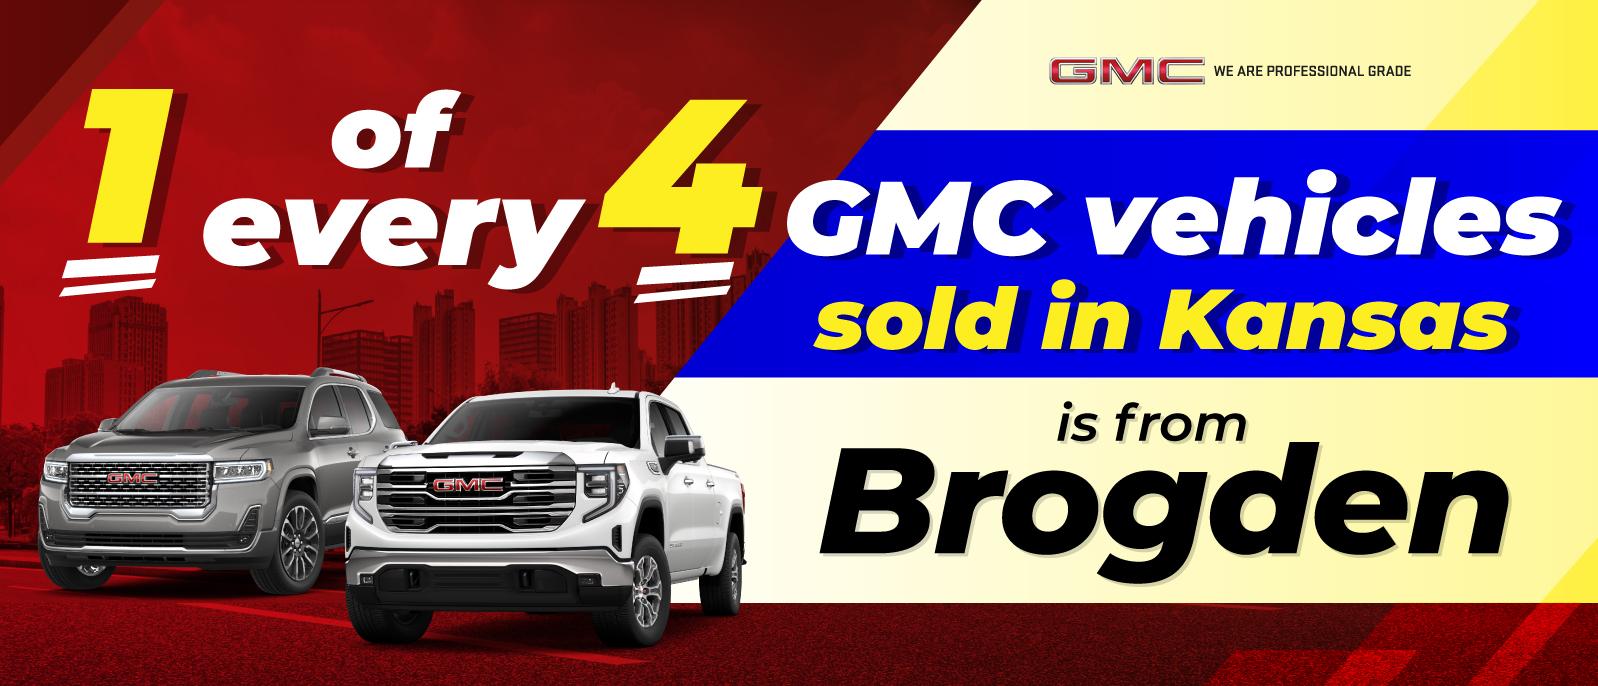 1 of every 4 GMCs sold in Kansas is from Brogden!